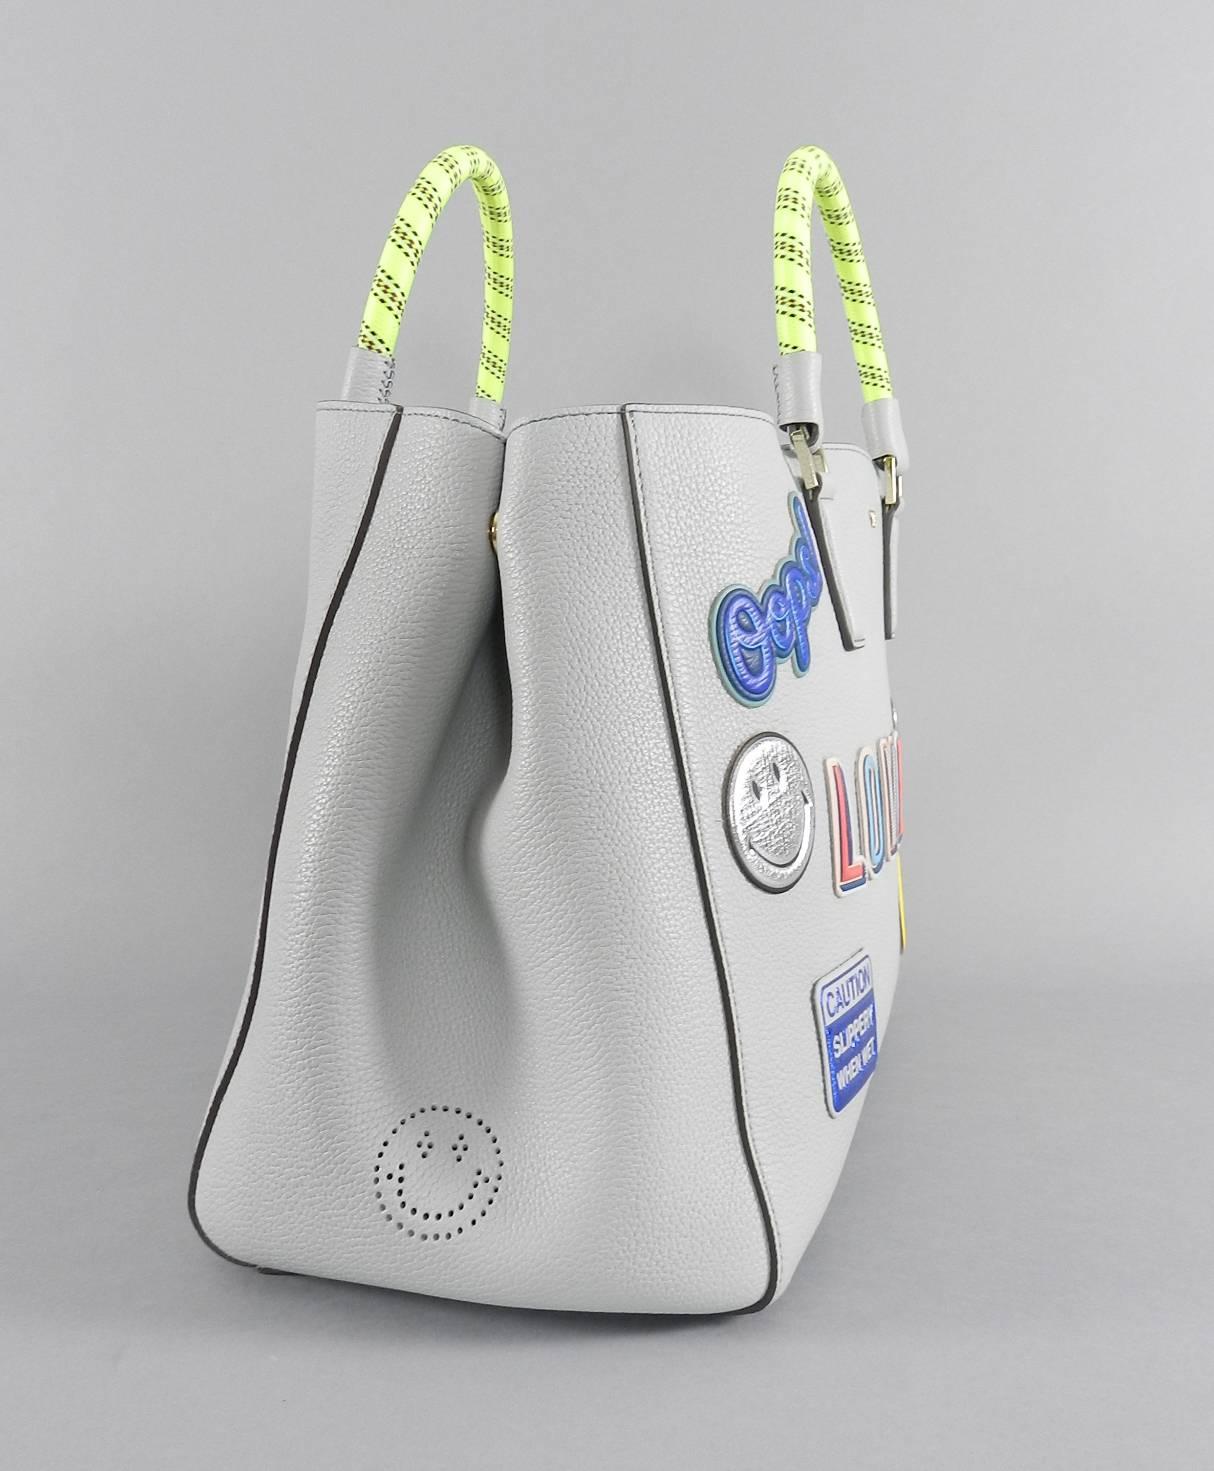 Gray Anya Hindmarch Ebury Large Featherweight bag - Light Blue with Stickers